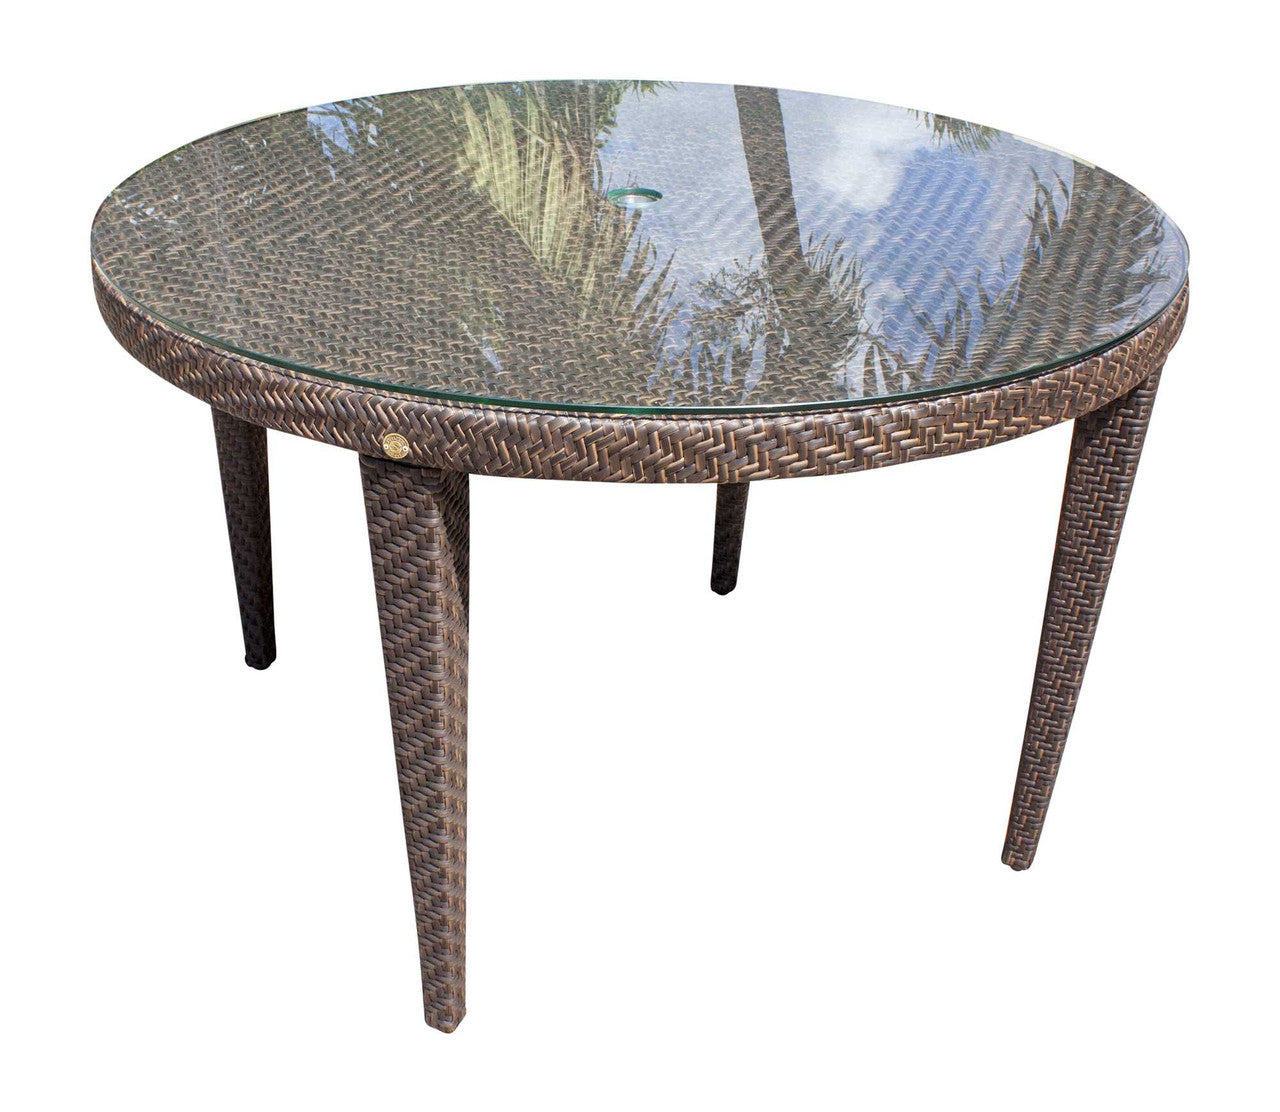 Hospitality Rattan Soho Patio Woven Round  47" Table with Glass